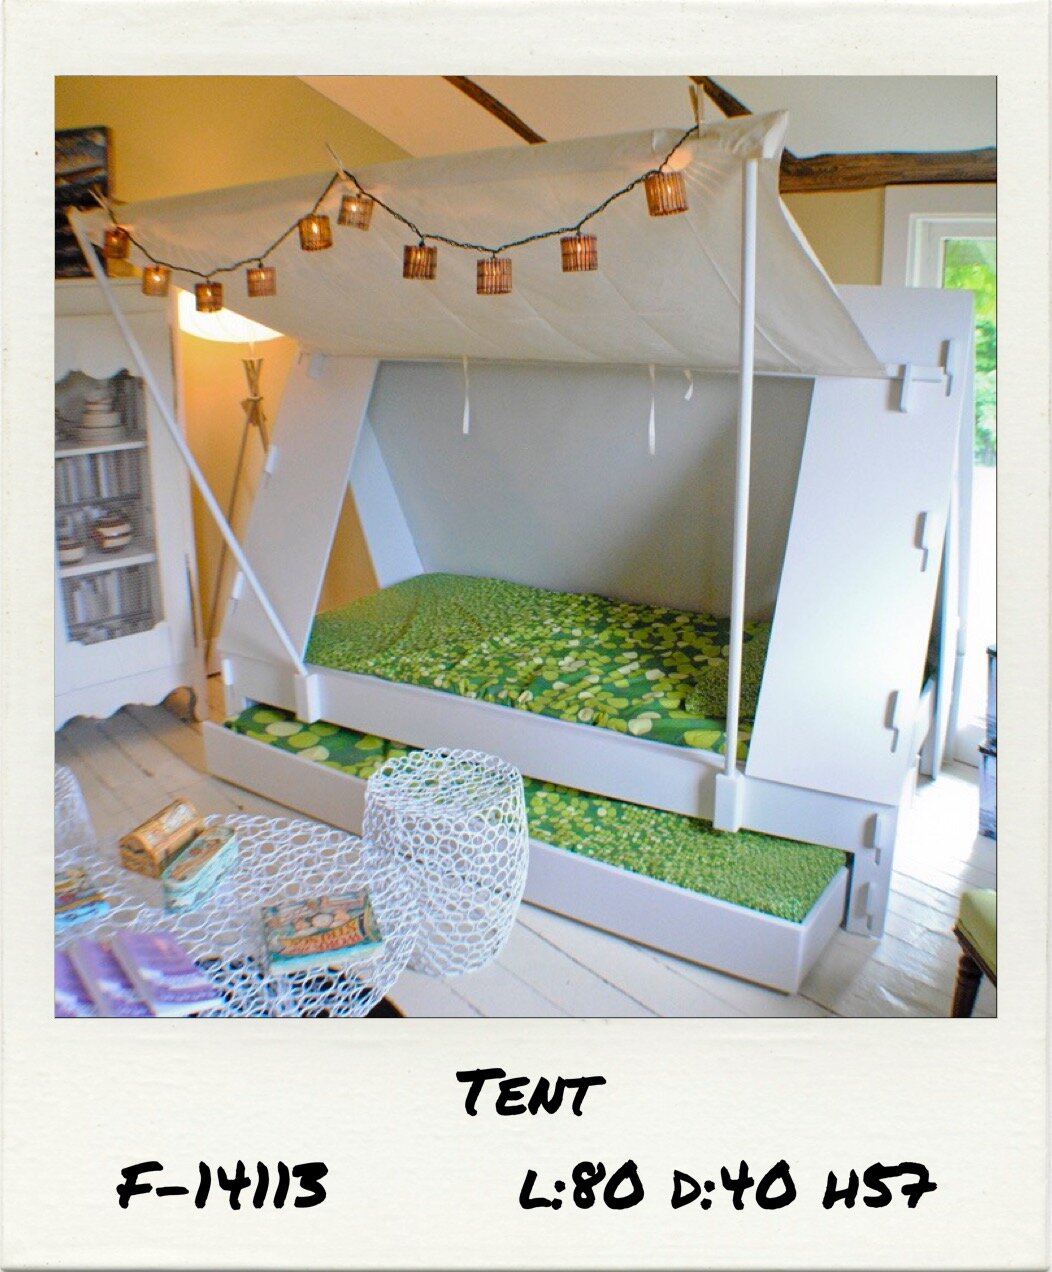 TENT BED  Mathy by Bols